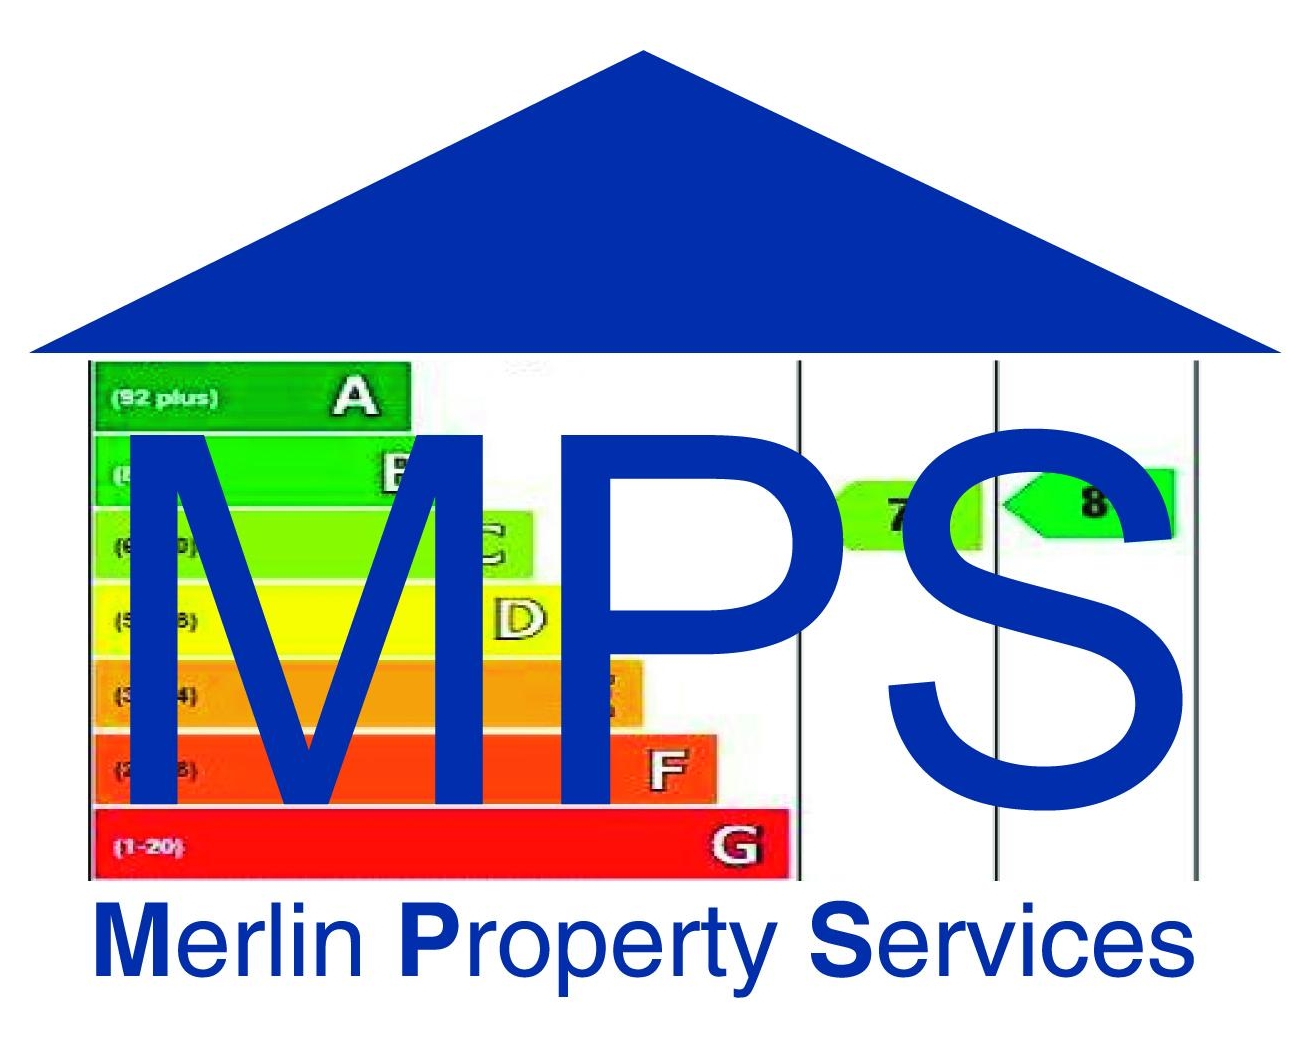 Merlin Property Services